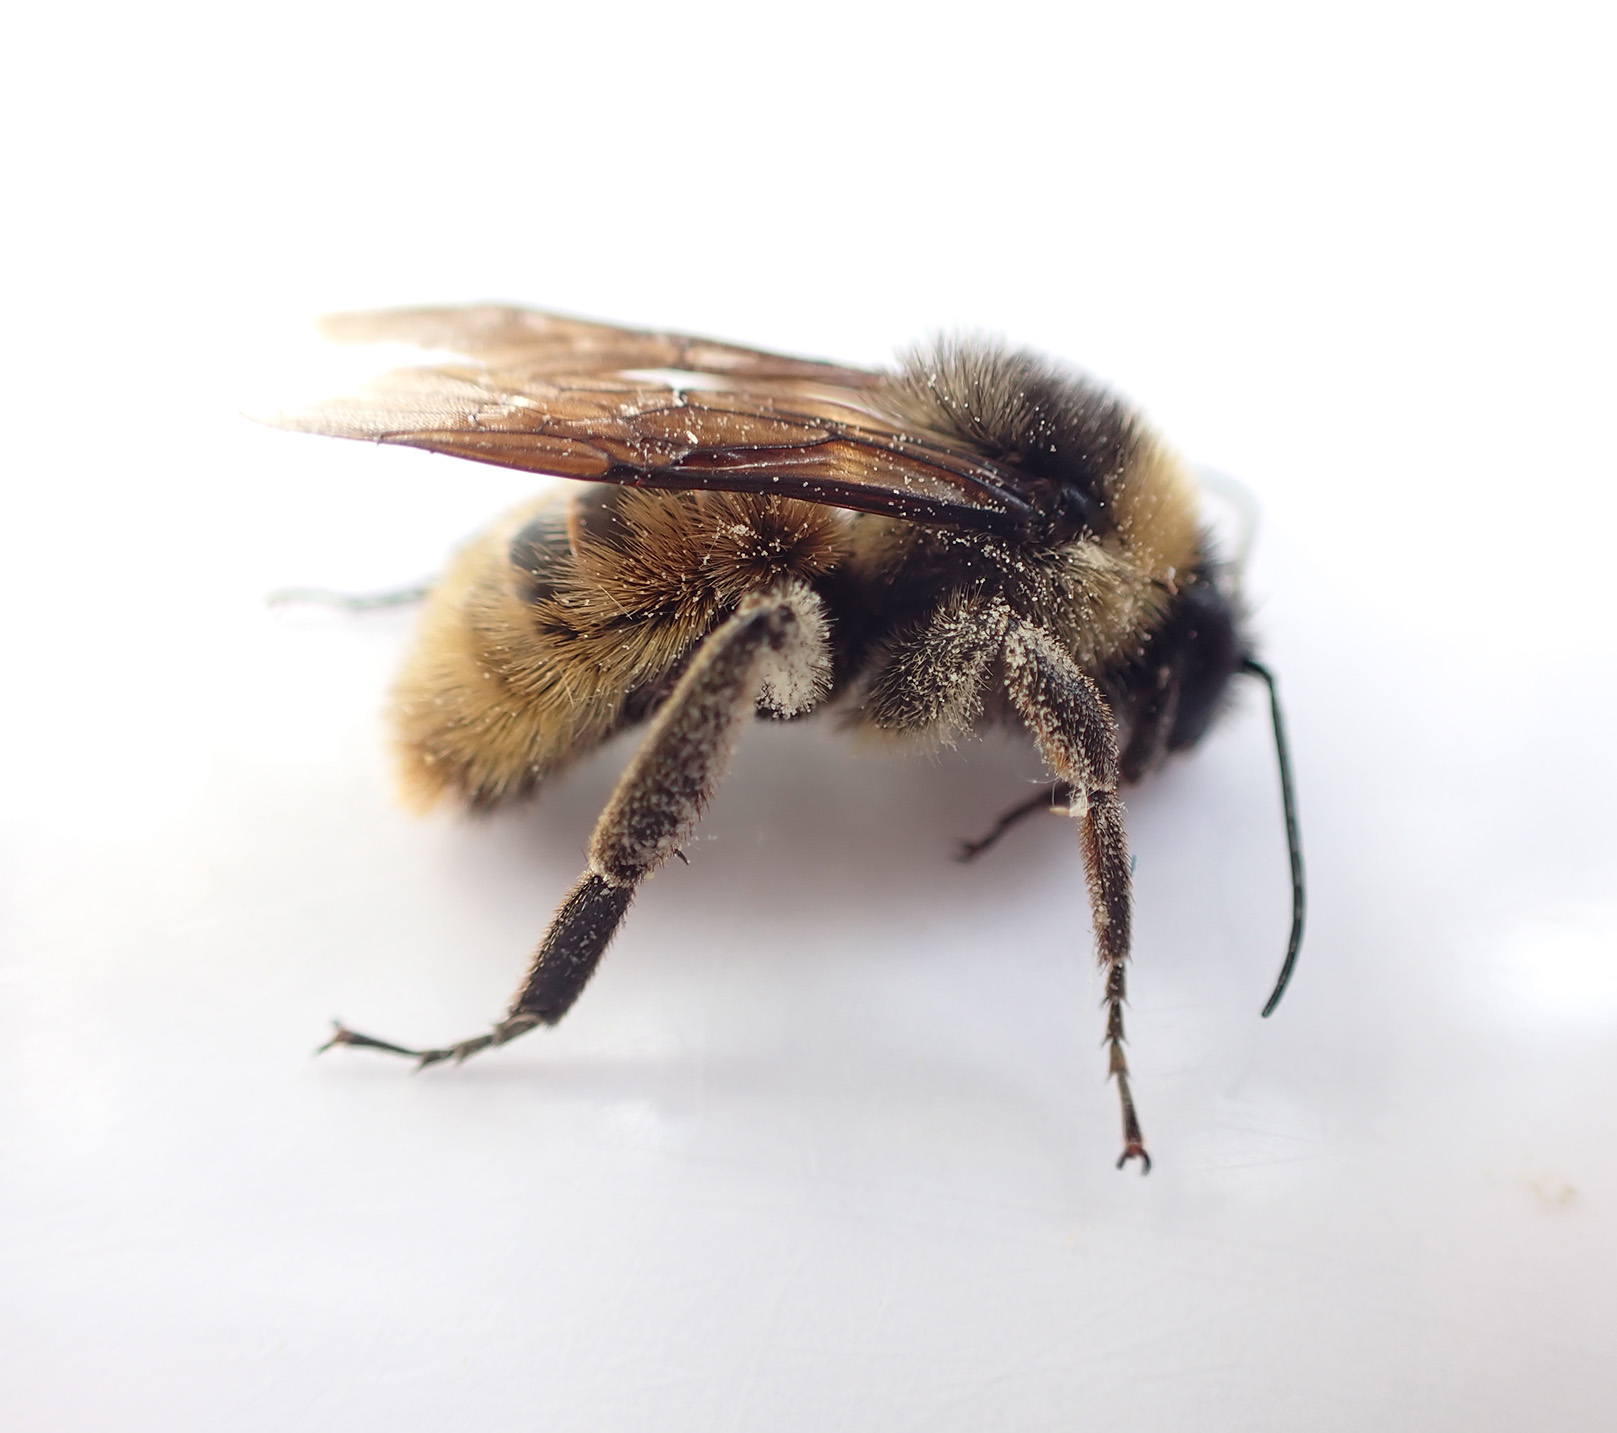 A bumble bee with fuzzy, somewhat distinct body segments, clings to a round, purple flower.